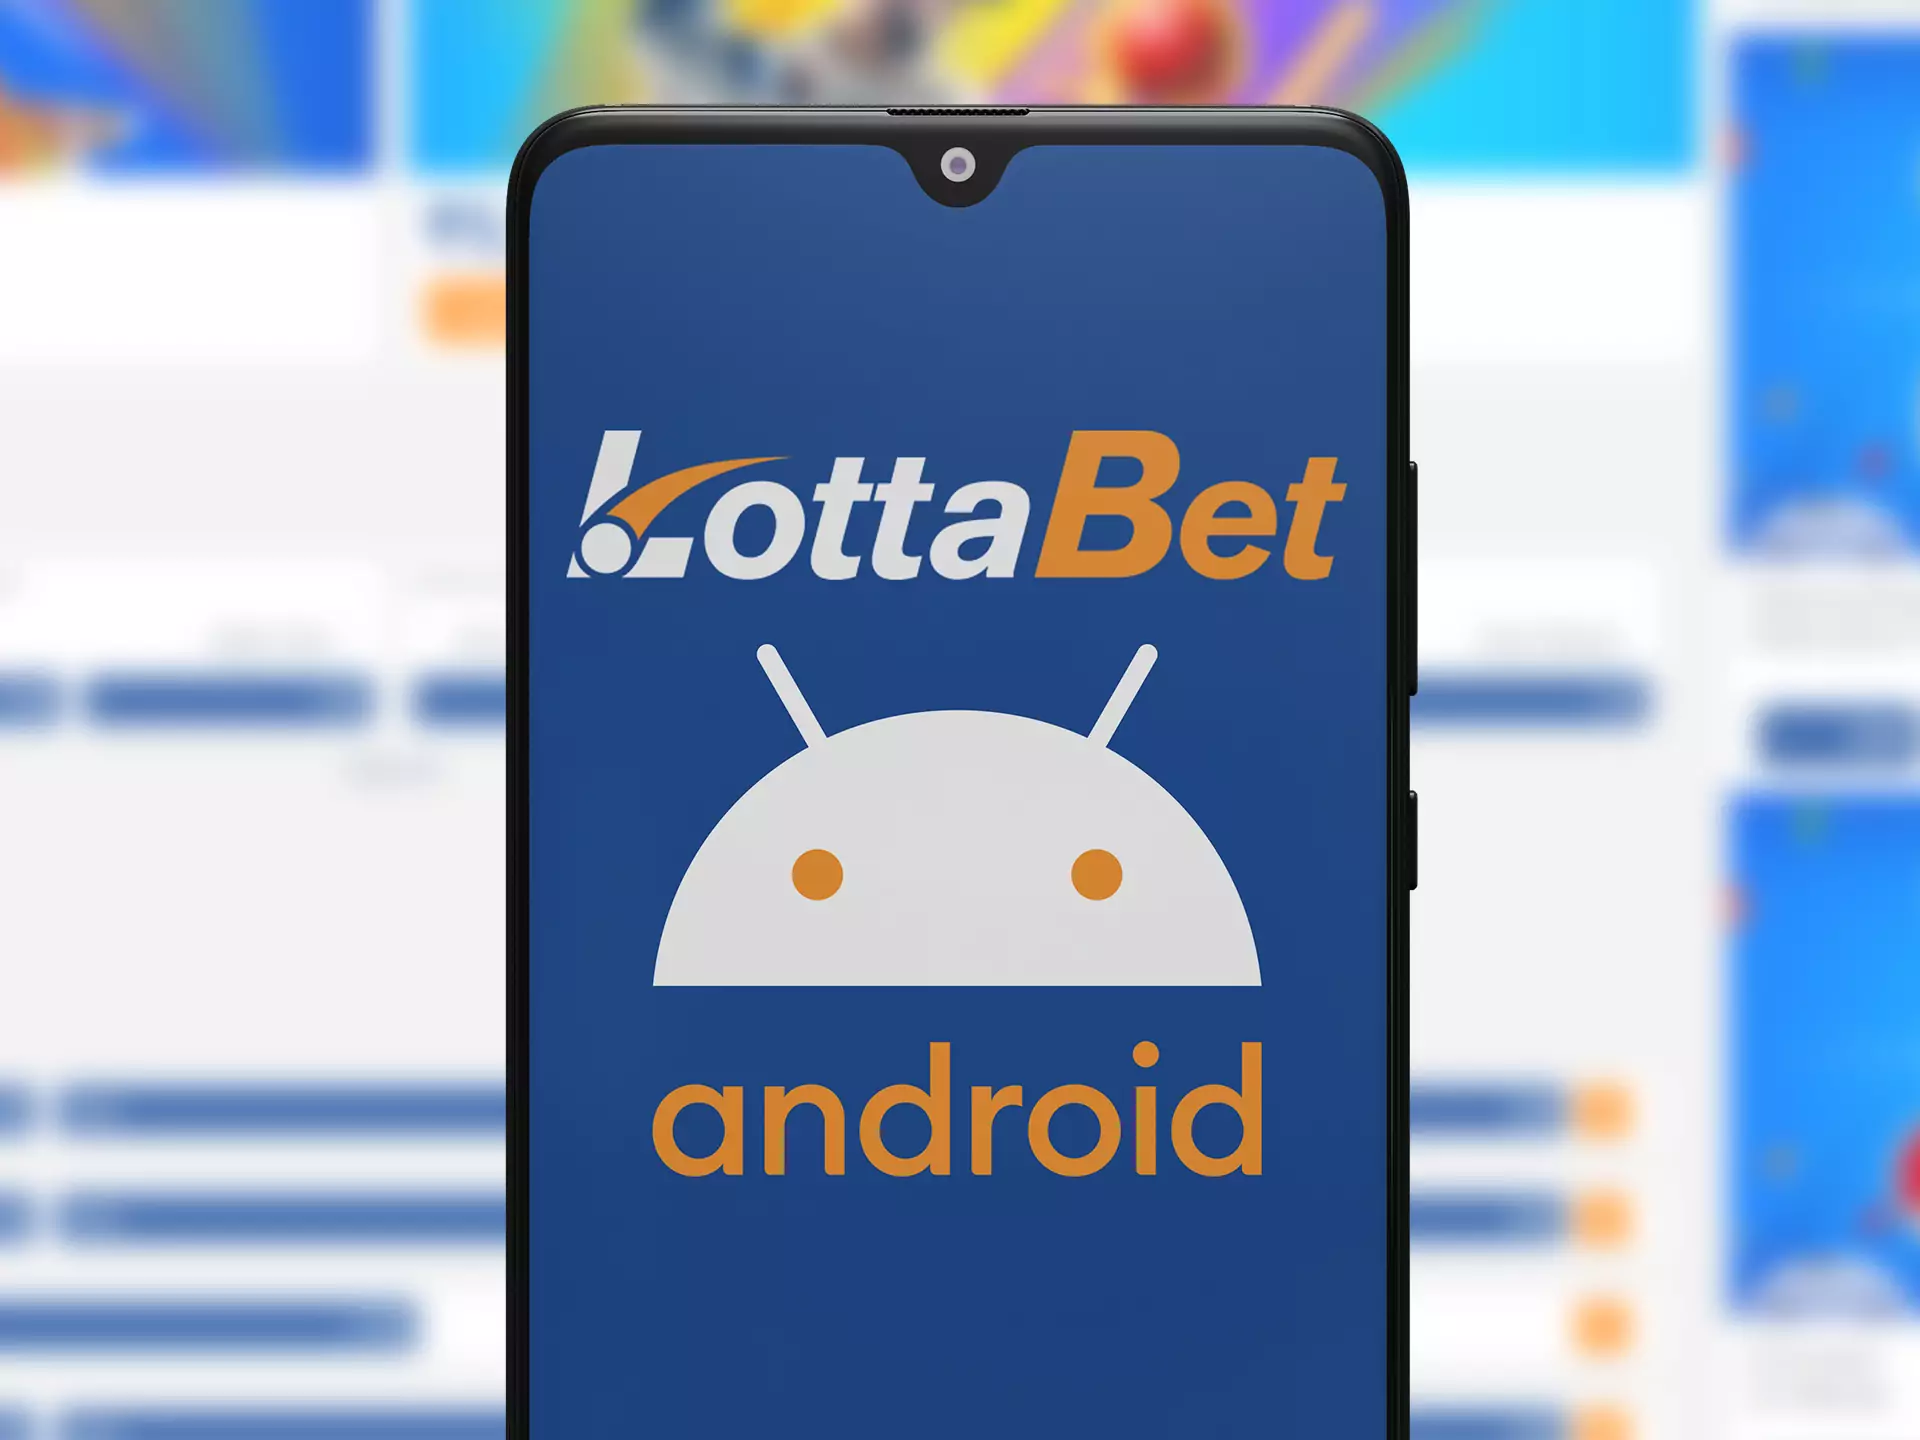 LottaBet app supports all of the Android devices.